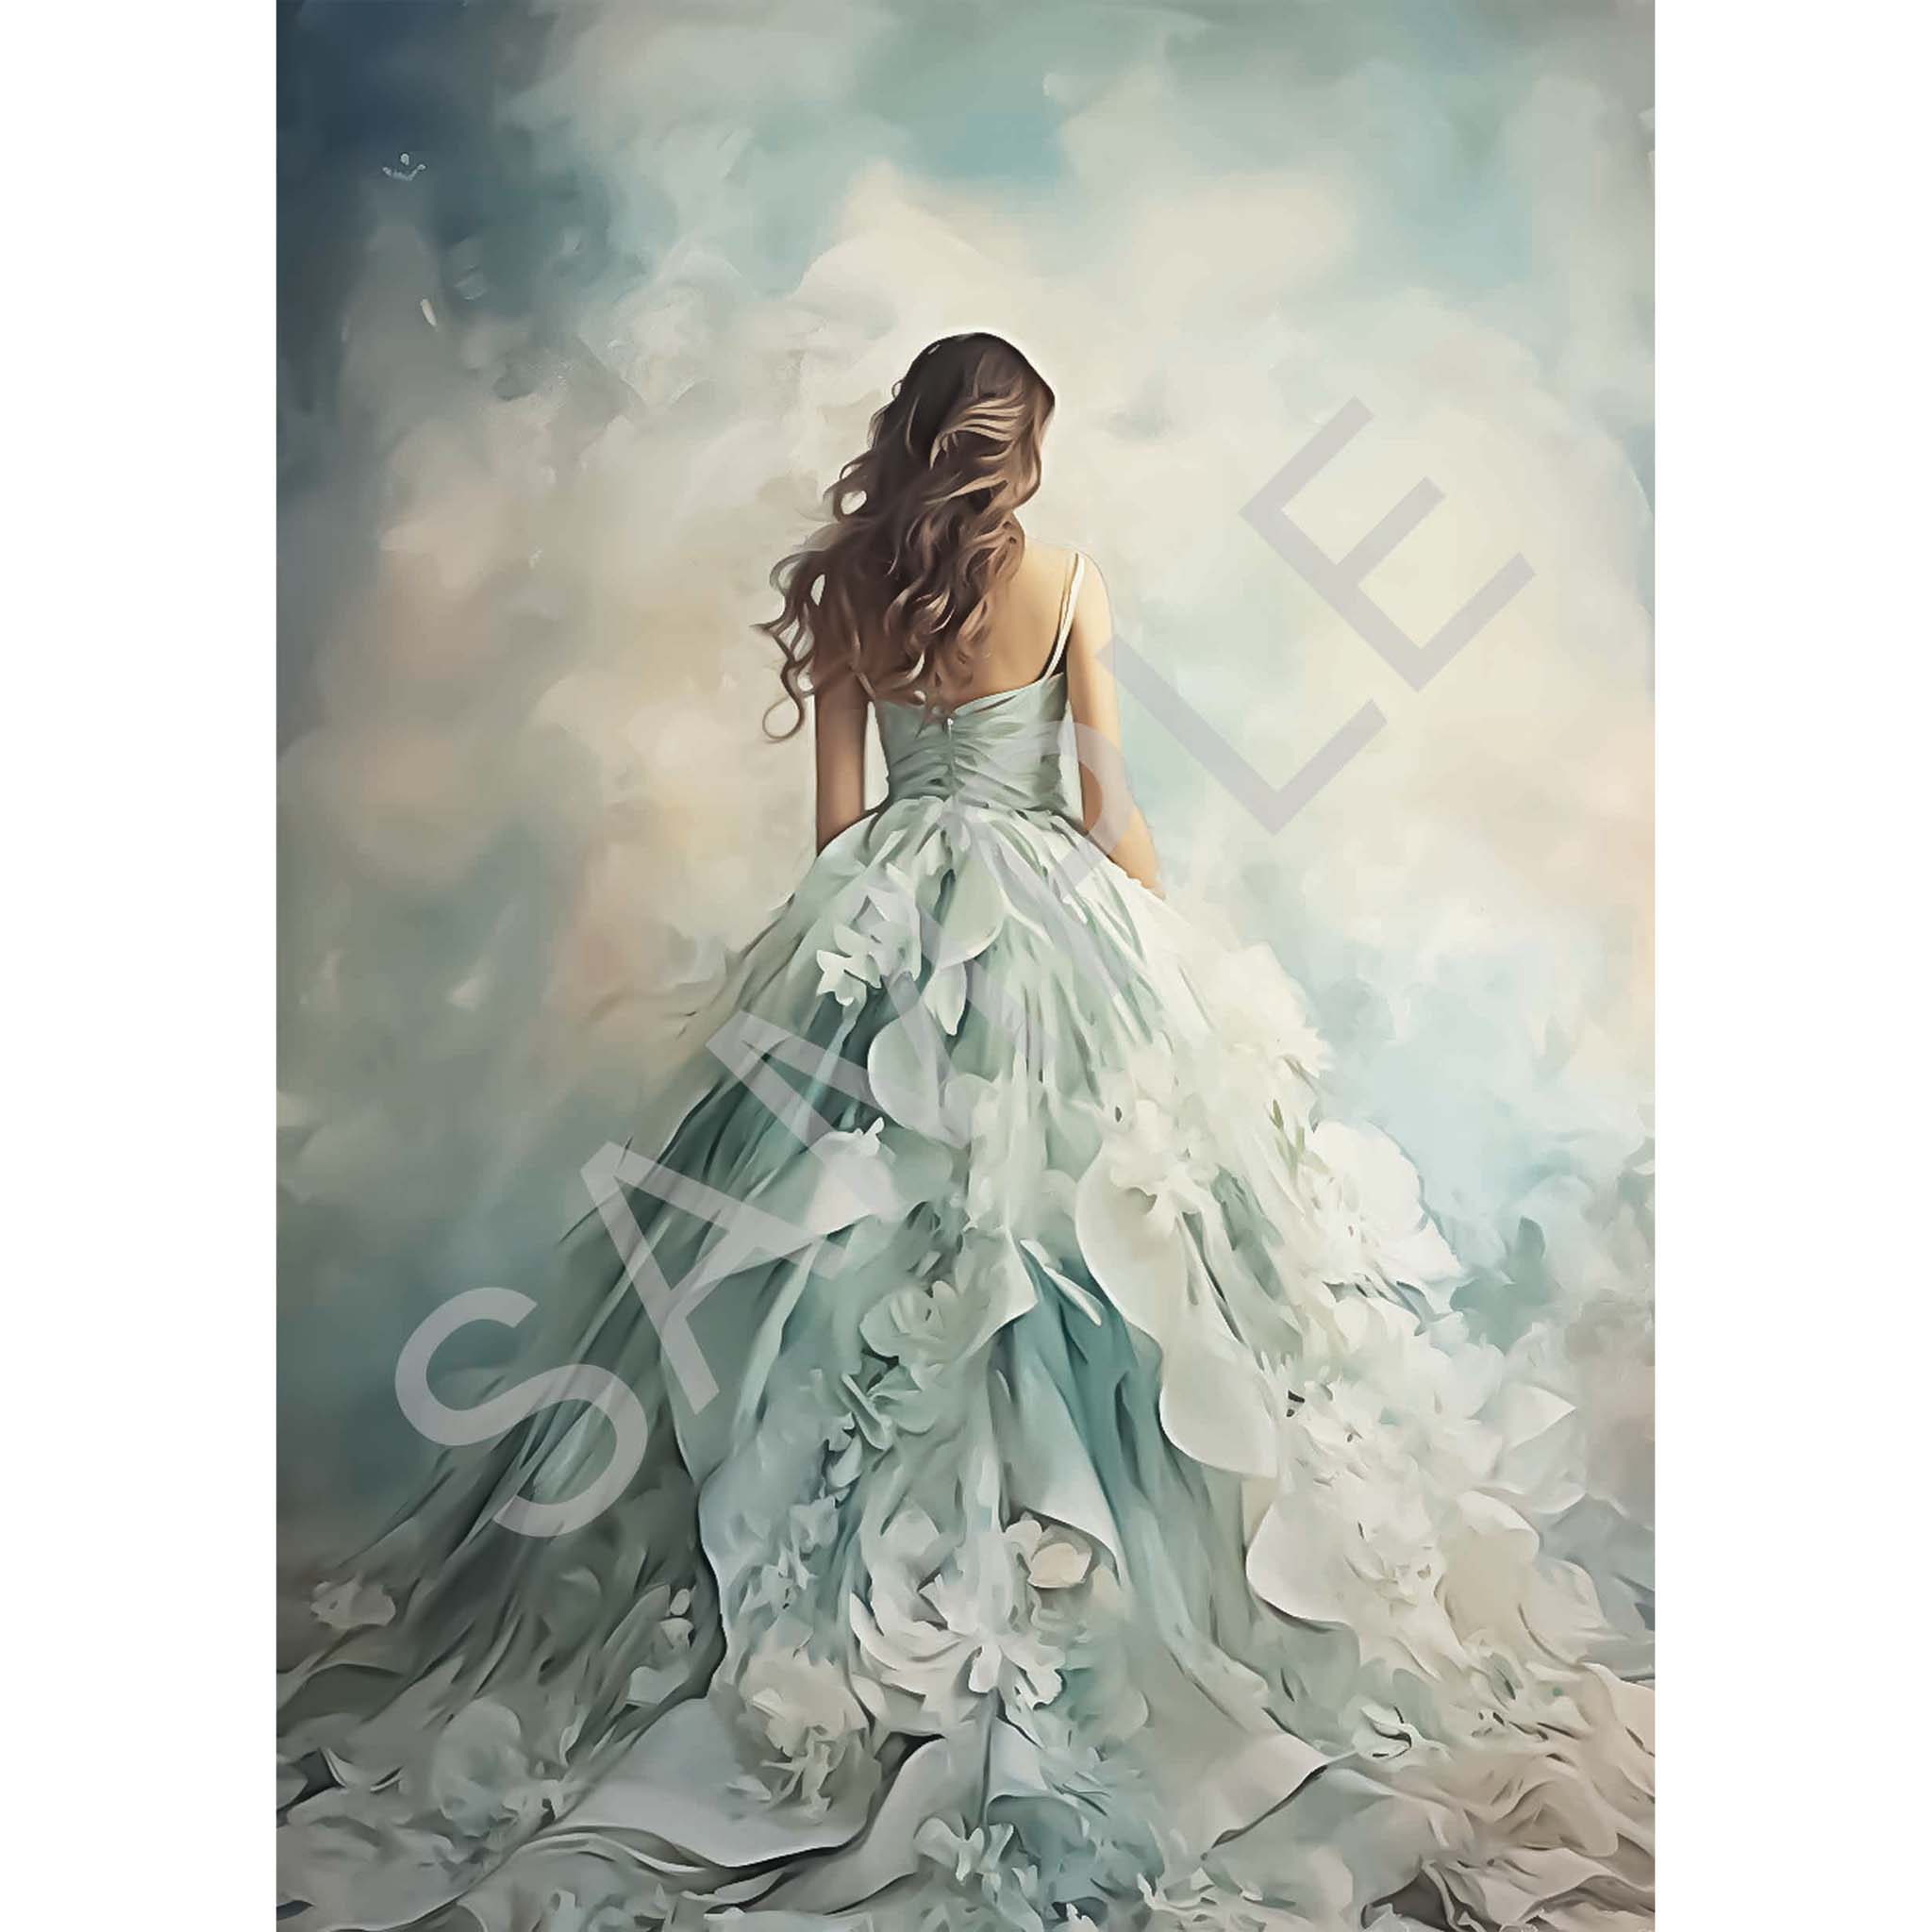 A4 rice paper design that features a stunning girl in a beautiful blue ballgown with floral details, walking towards a misty background.  White borders are on the sides.